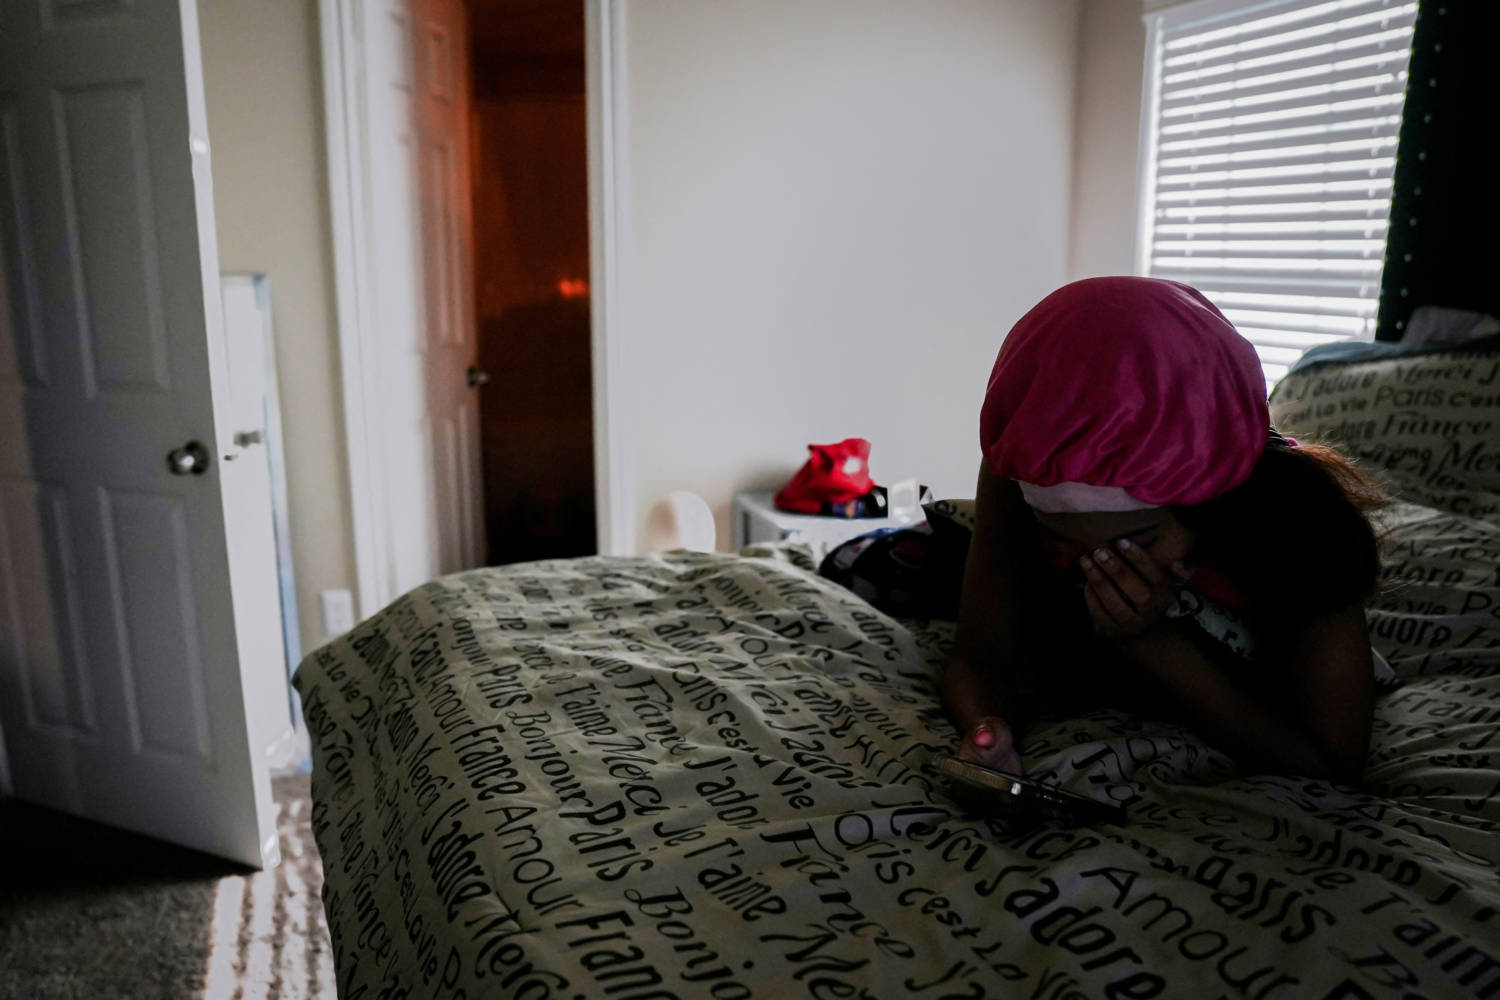 Adreiona Prater Checks Her Phone While Lying On The Bed Of Her Apartment In Dallas